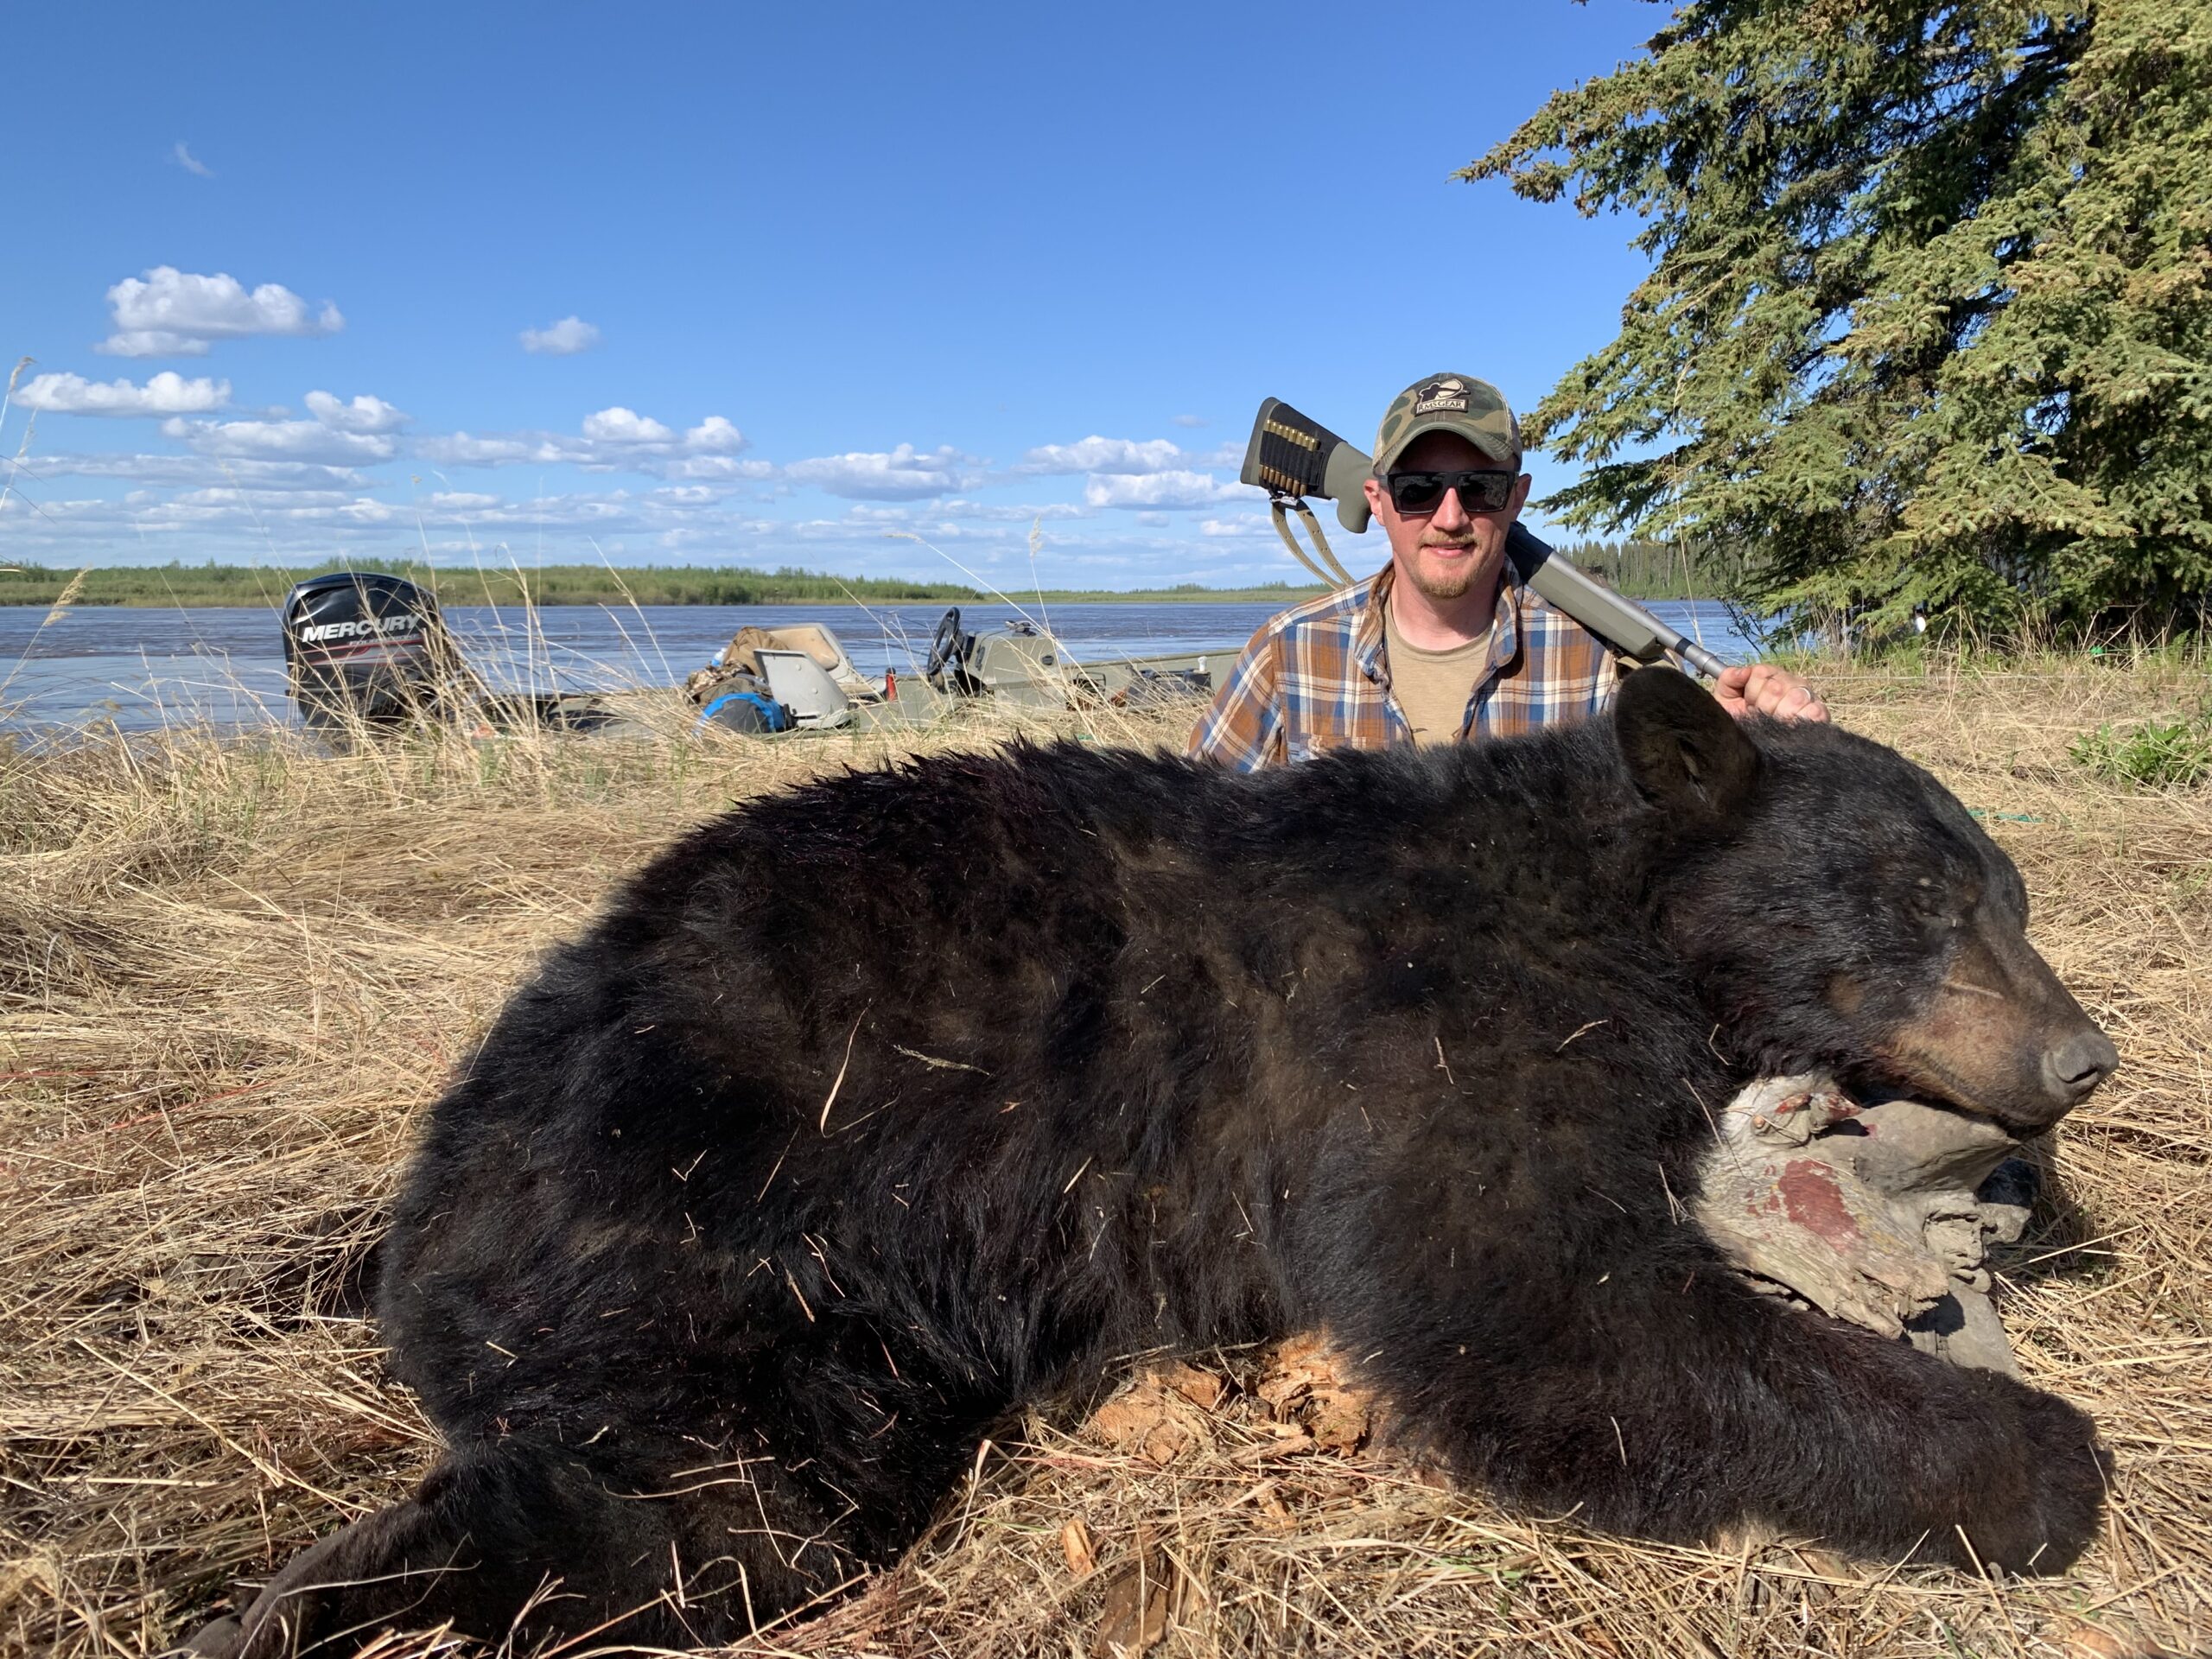 Freel with the black bear that became aggressive